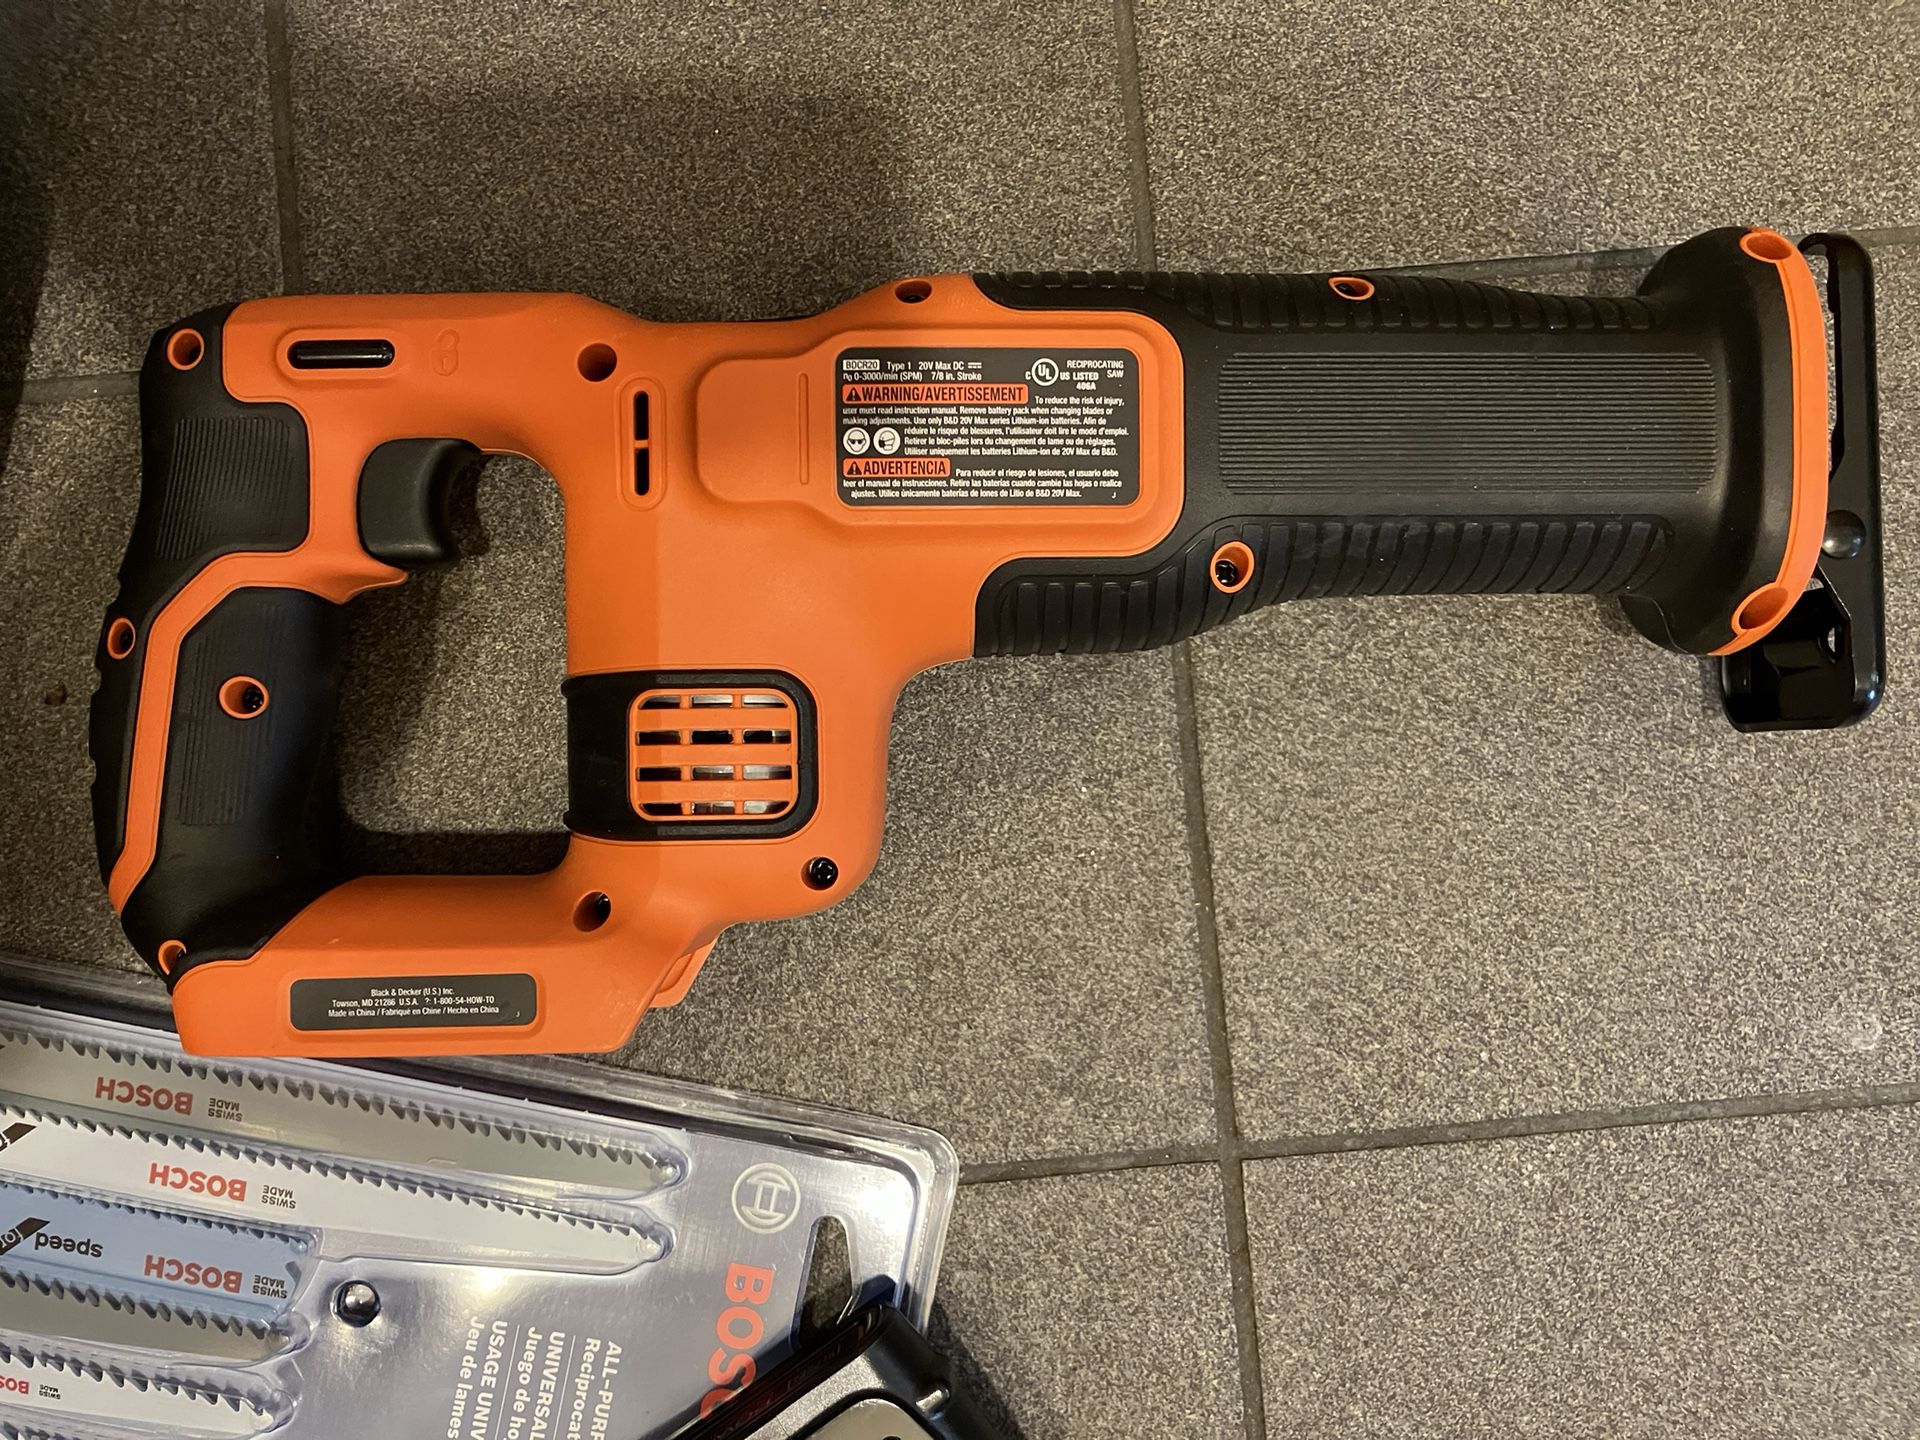 BLACK+DECKER 20V MAX* POWERCONNECT 7/8 in. Cordless Reciprocating